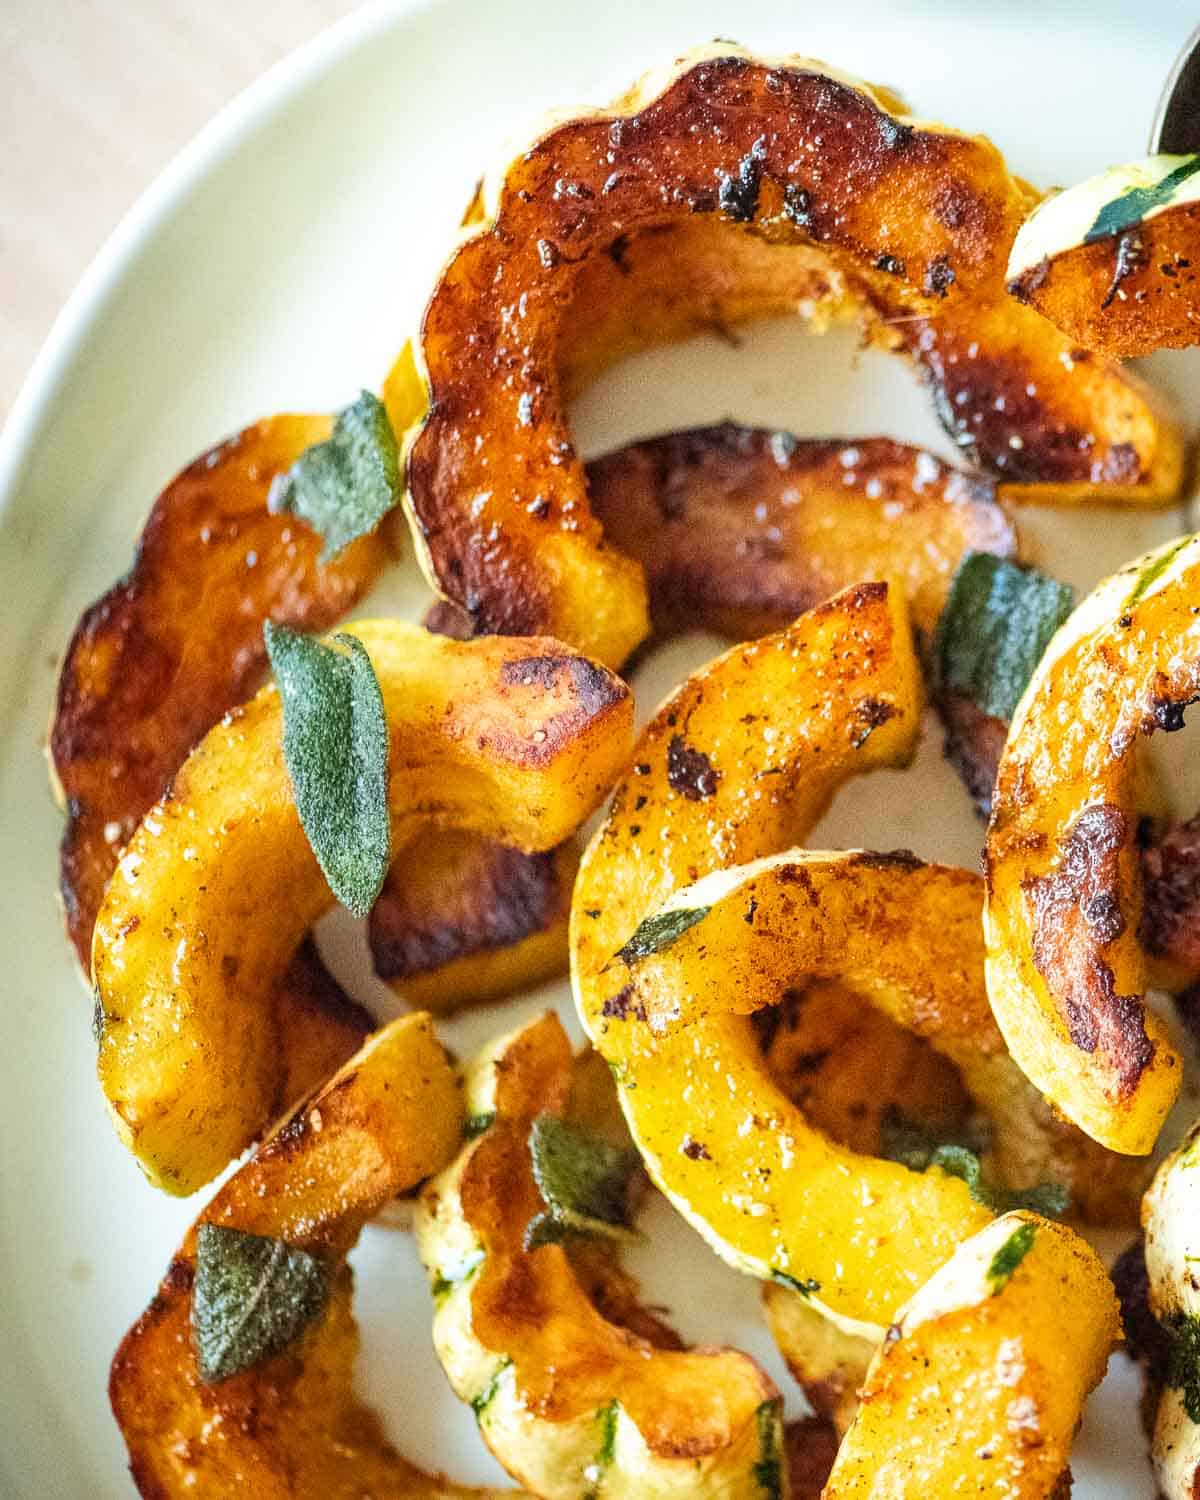 Roasted delicata squash with sage leaves on a plate.